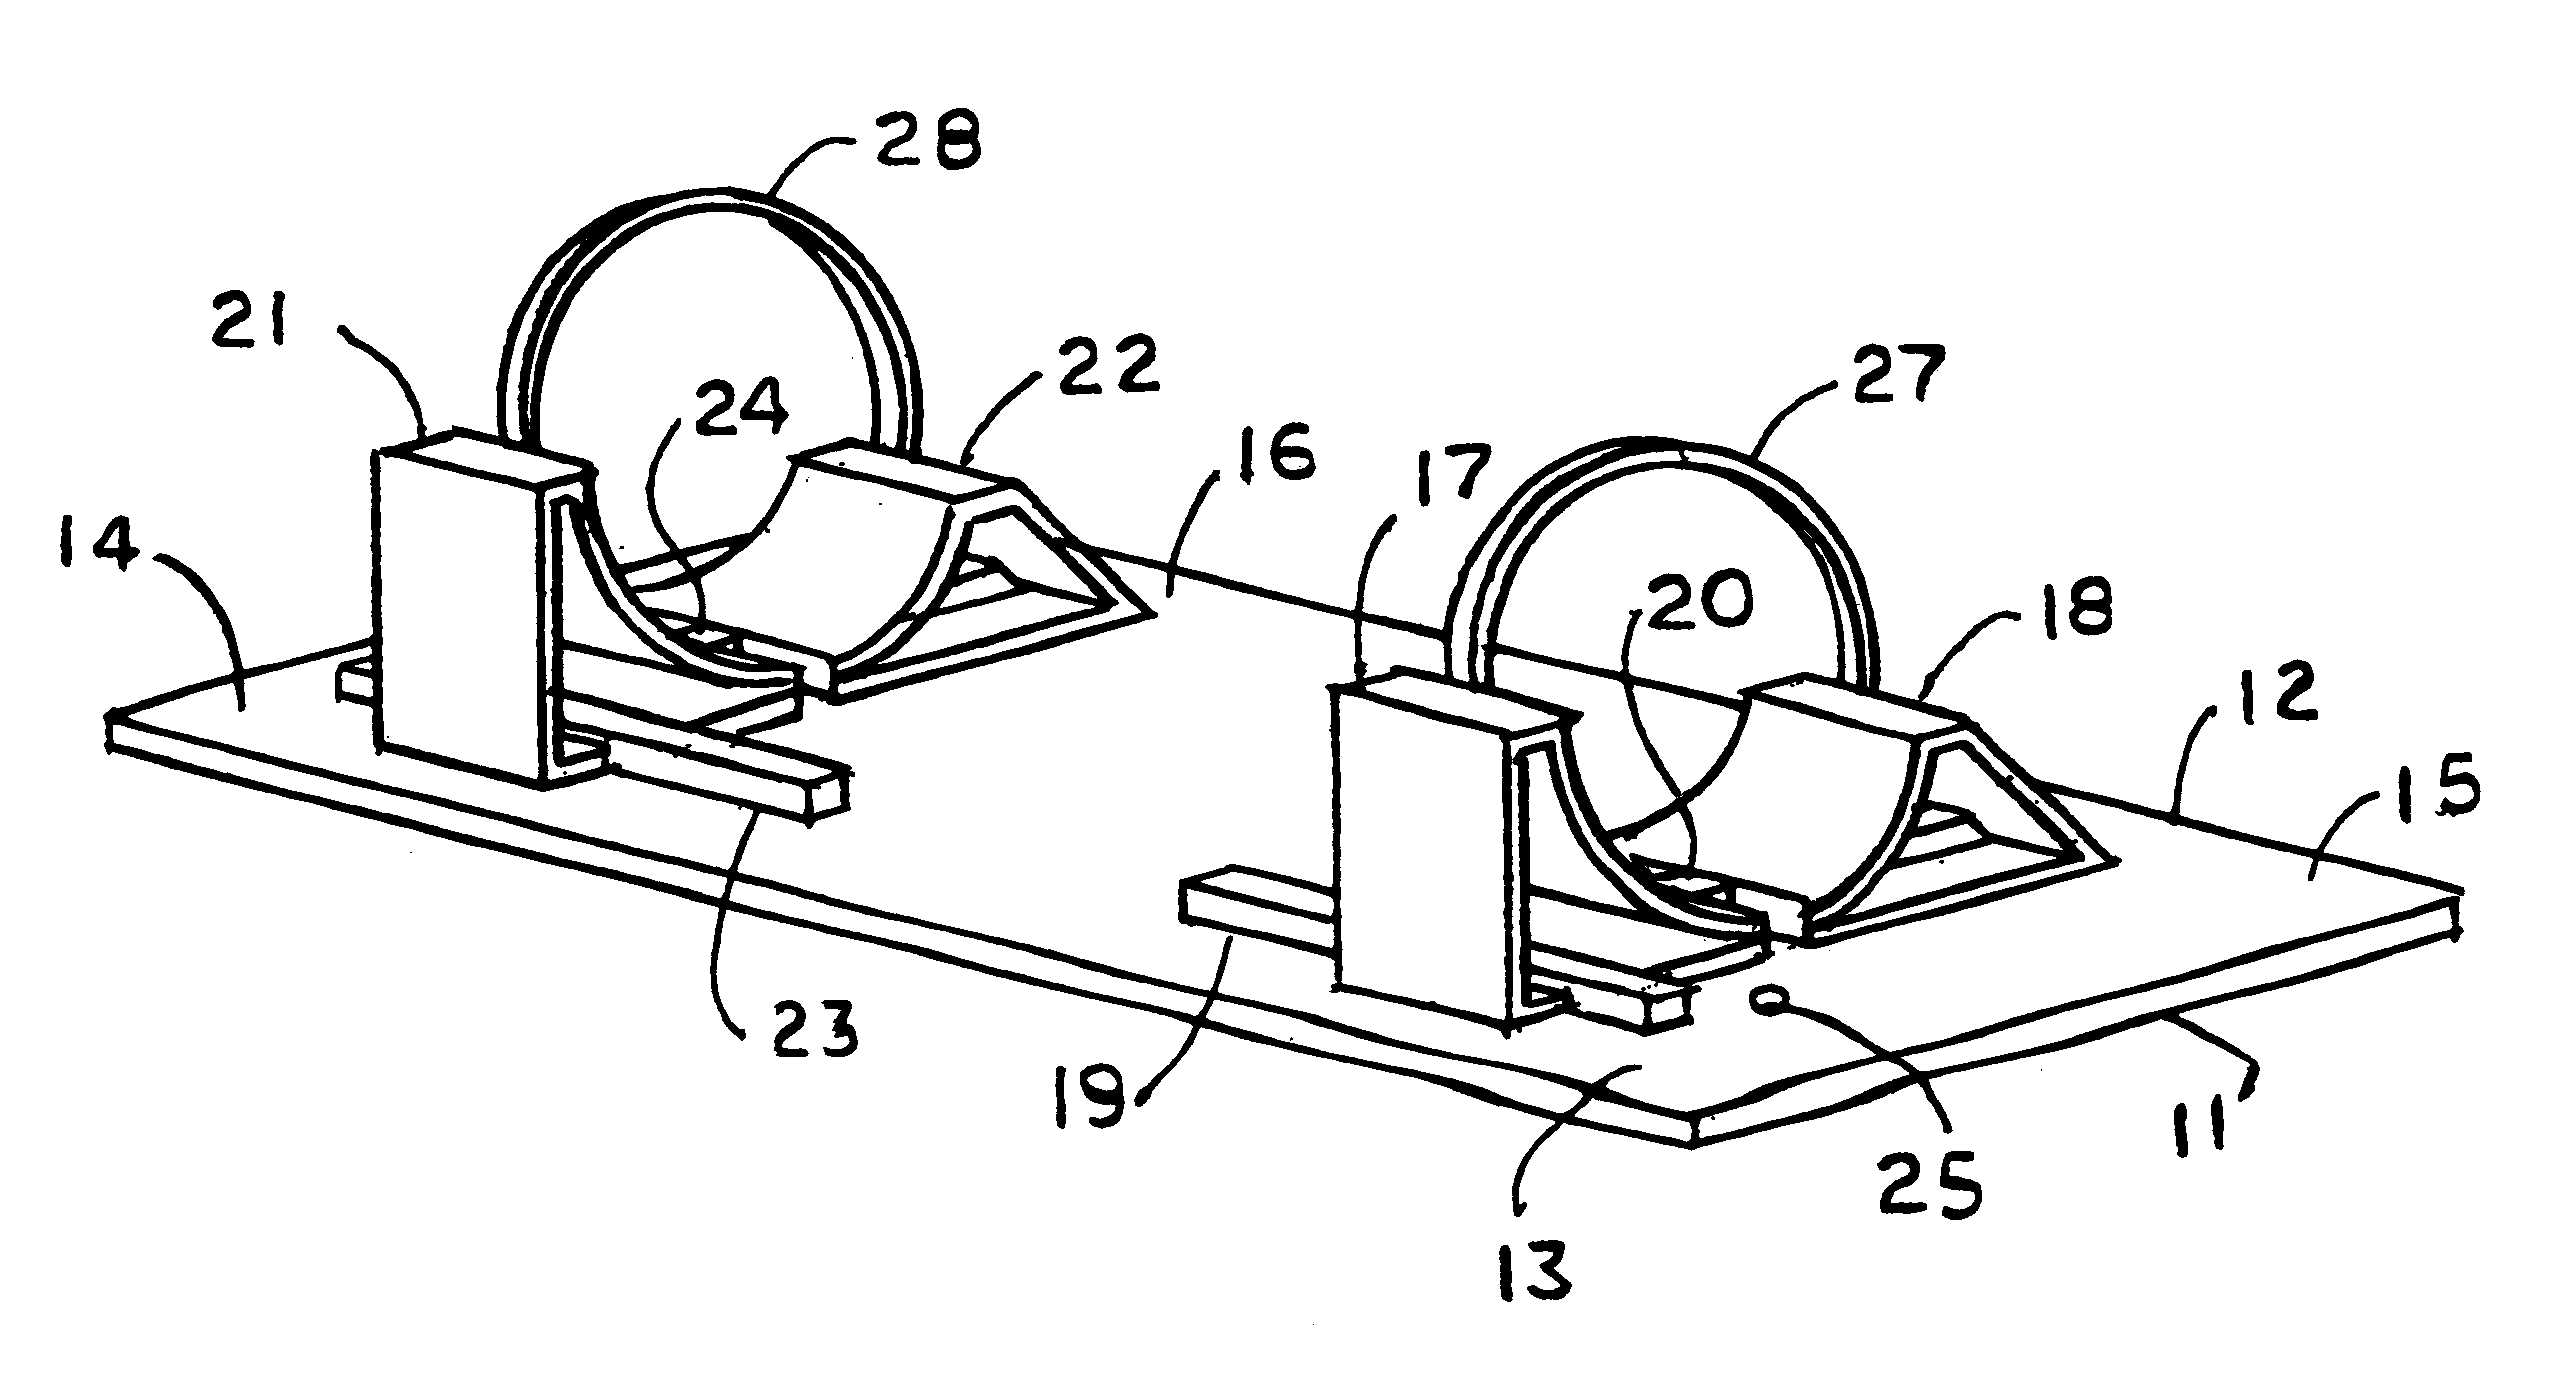 Compact adjustable wheel chock assembly for retainment of multi-size wheels